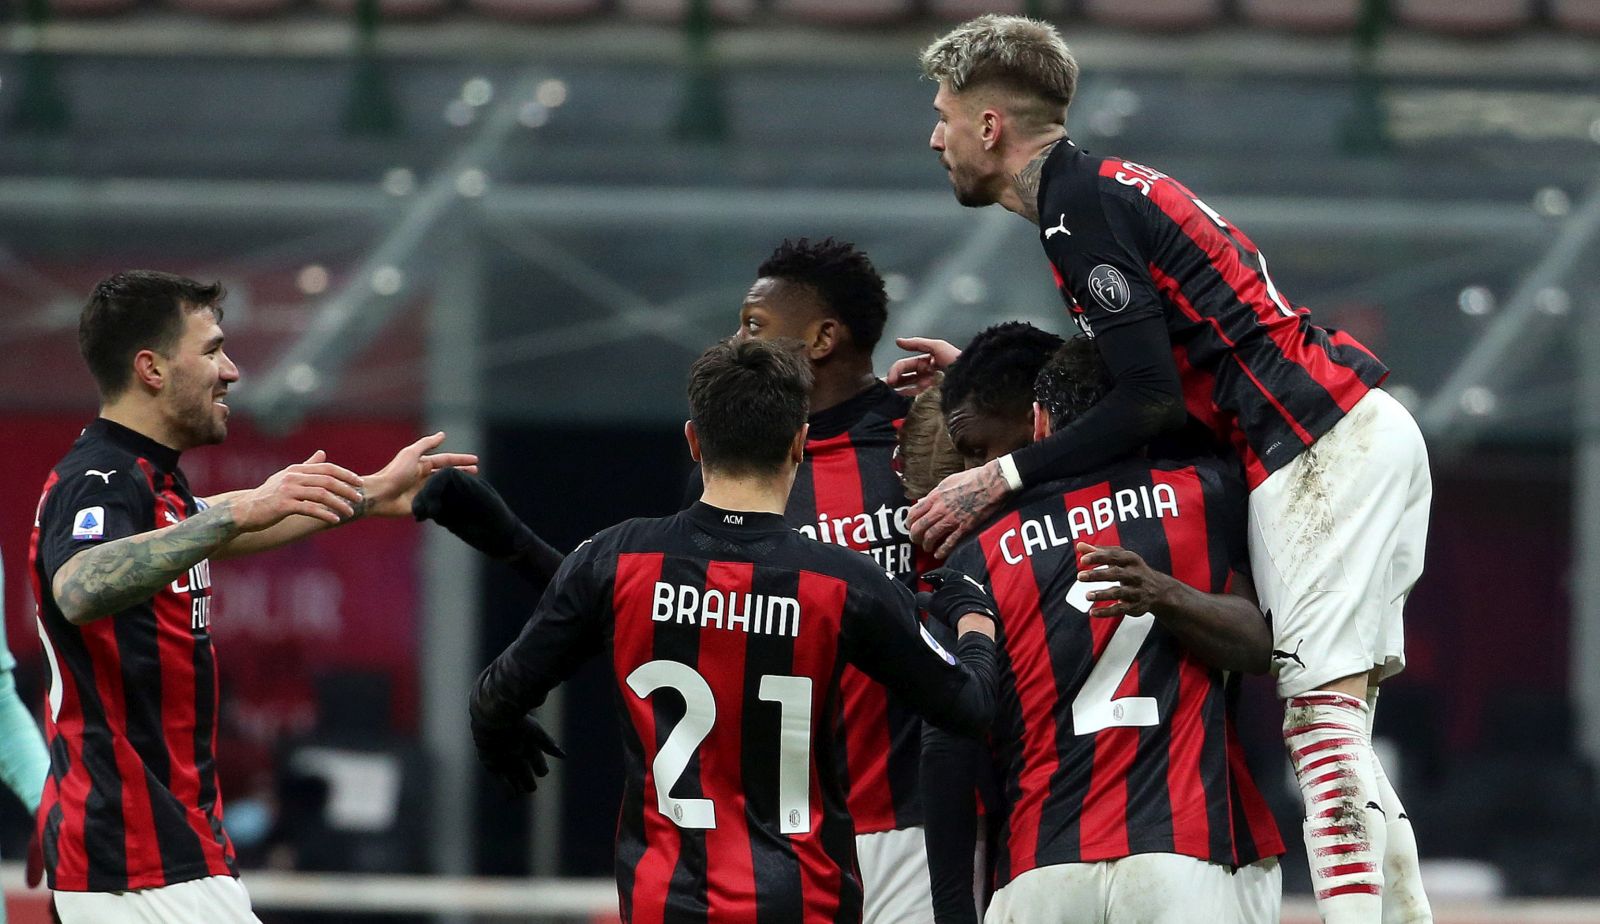 epa08929245 AC Milan's Franck Kessie (C) celebrates with teammates after scoring his team's second goal during the Italian Serie A soccer match between AC Milan and Torino FC at Giuseppe Meazza stadium in Milan, Italy, 09 January 2021.  EPA/MATTEO BAZZI